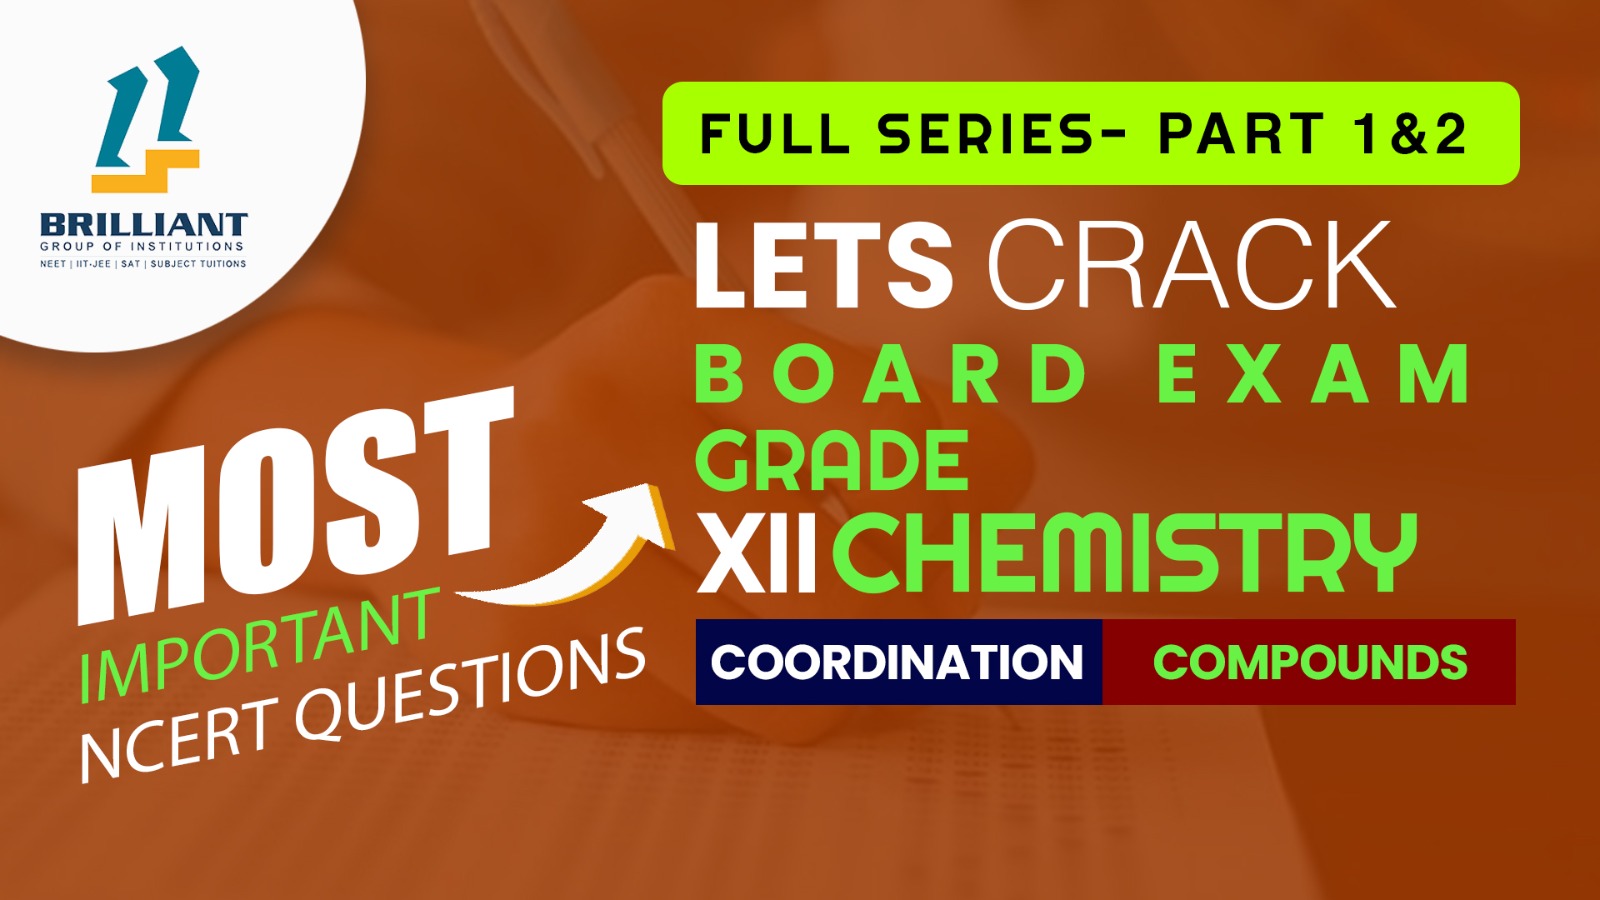 Coordination Compounds in Grade 12 Chemistry Full Series